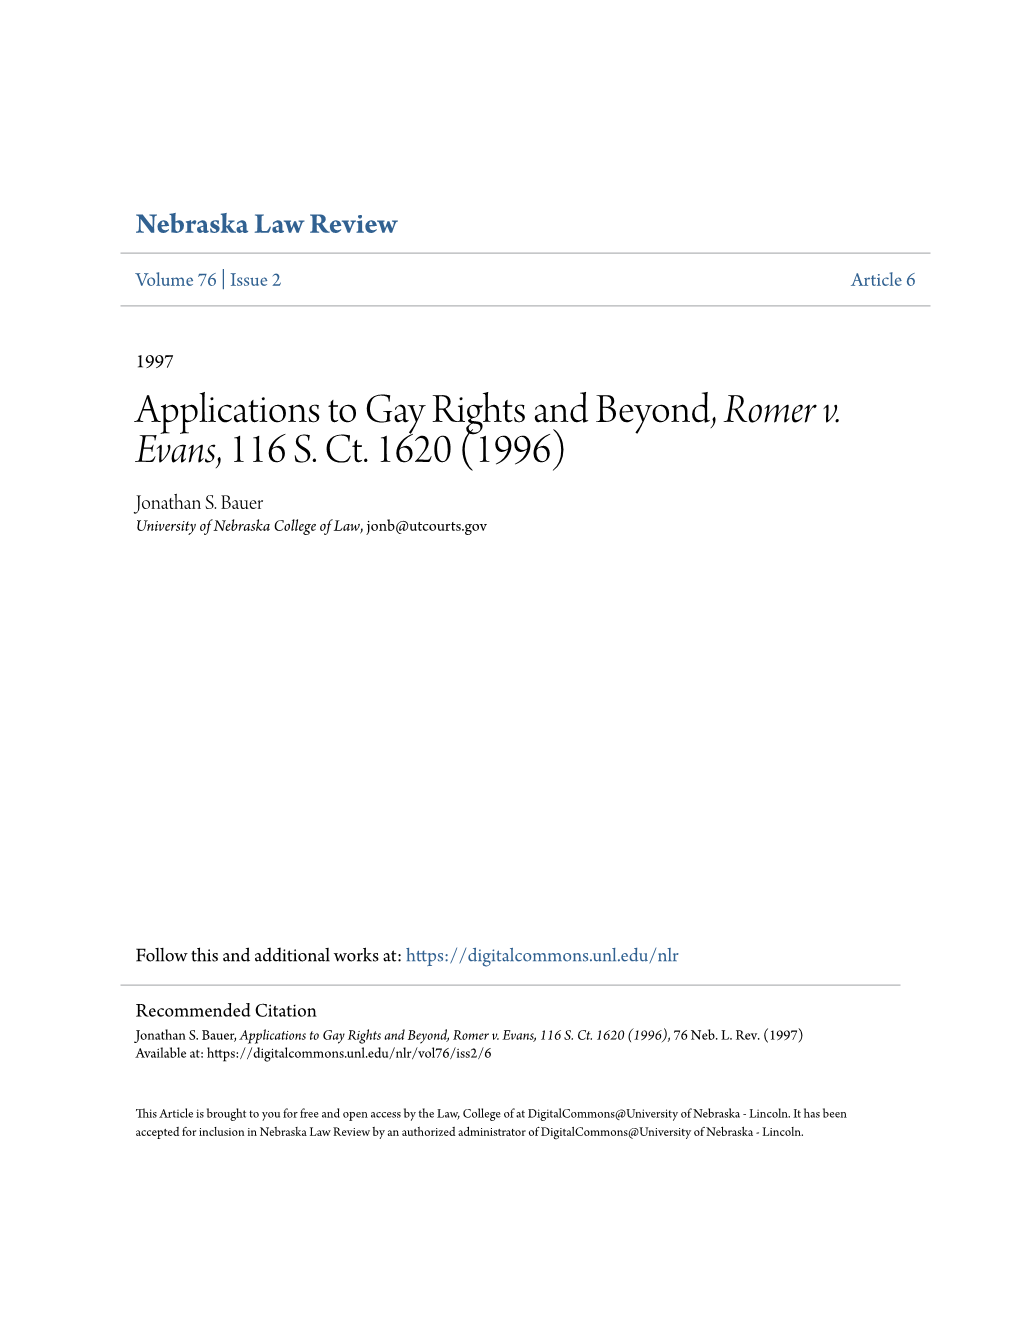 Applications to Gay Rights and Beyond, Romer V. Evans, 116 S. Ct